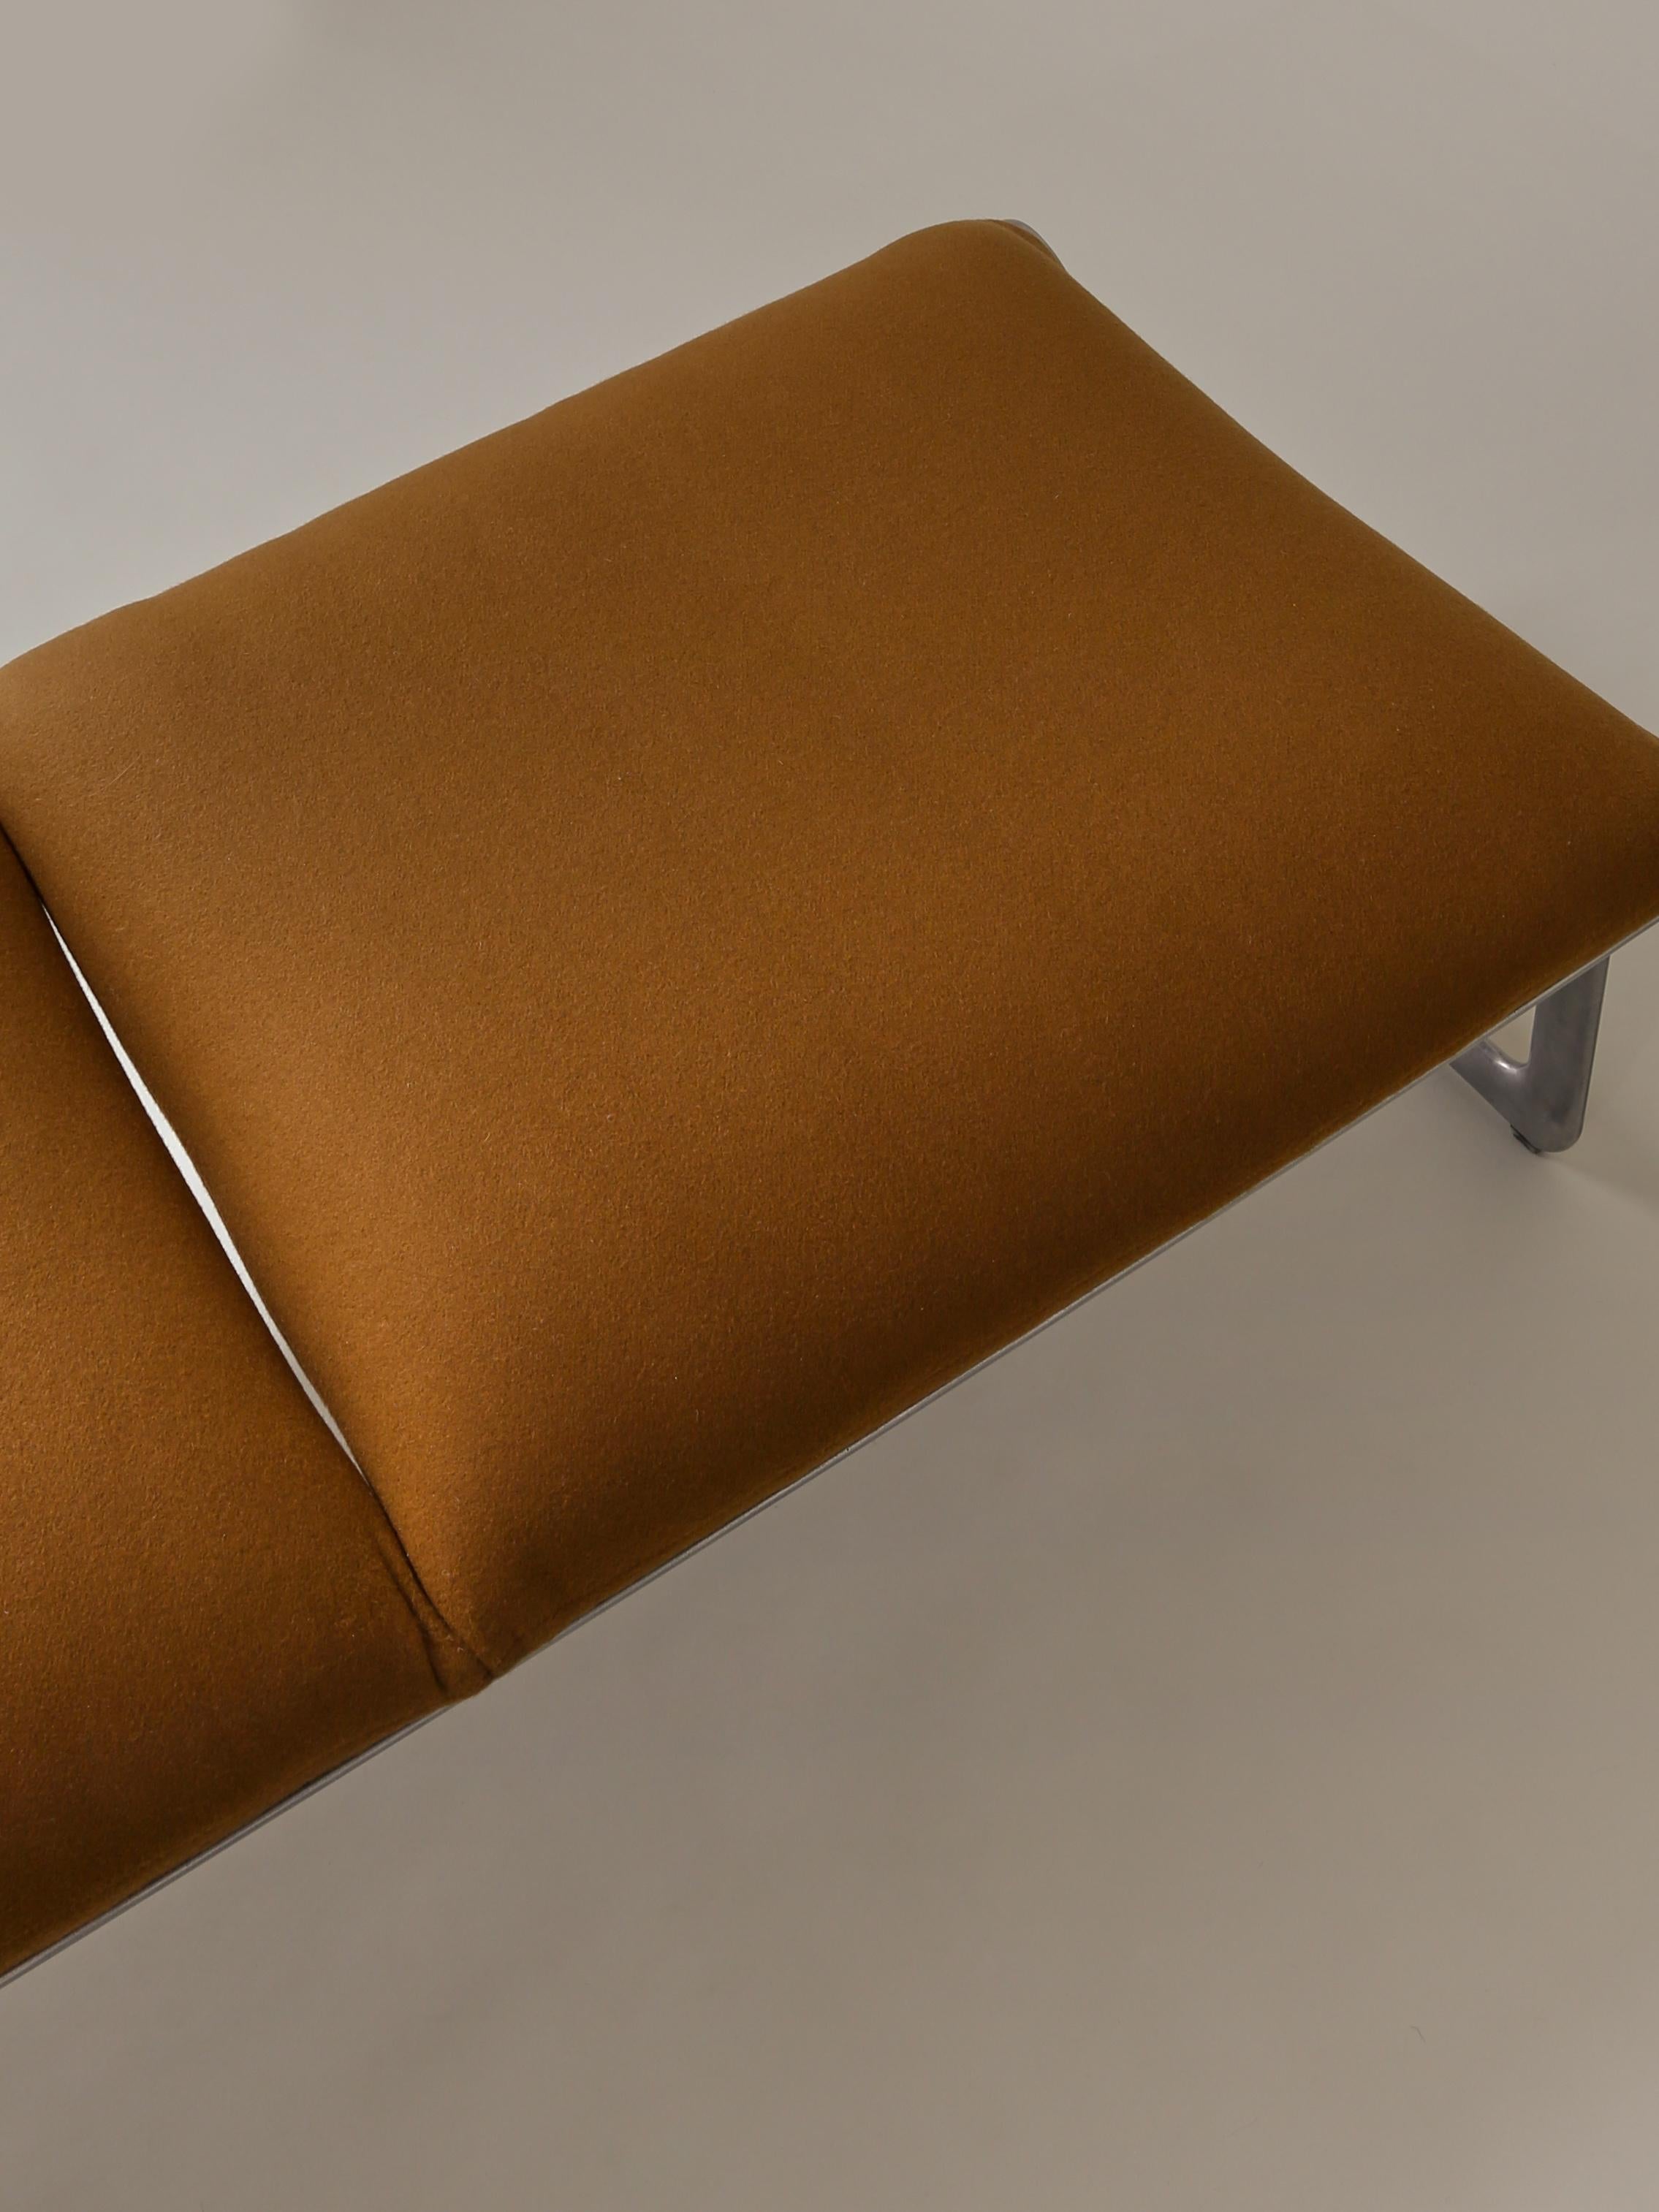 Late 20th Century Bruce Hannah and Andrew Morrison for Knoll Bench in Bronze Cashmere